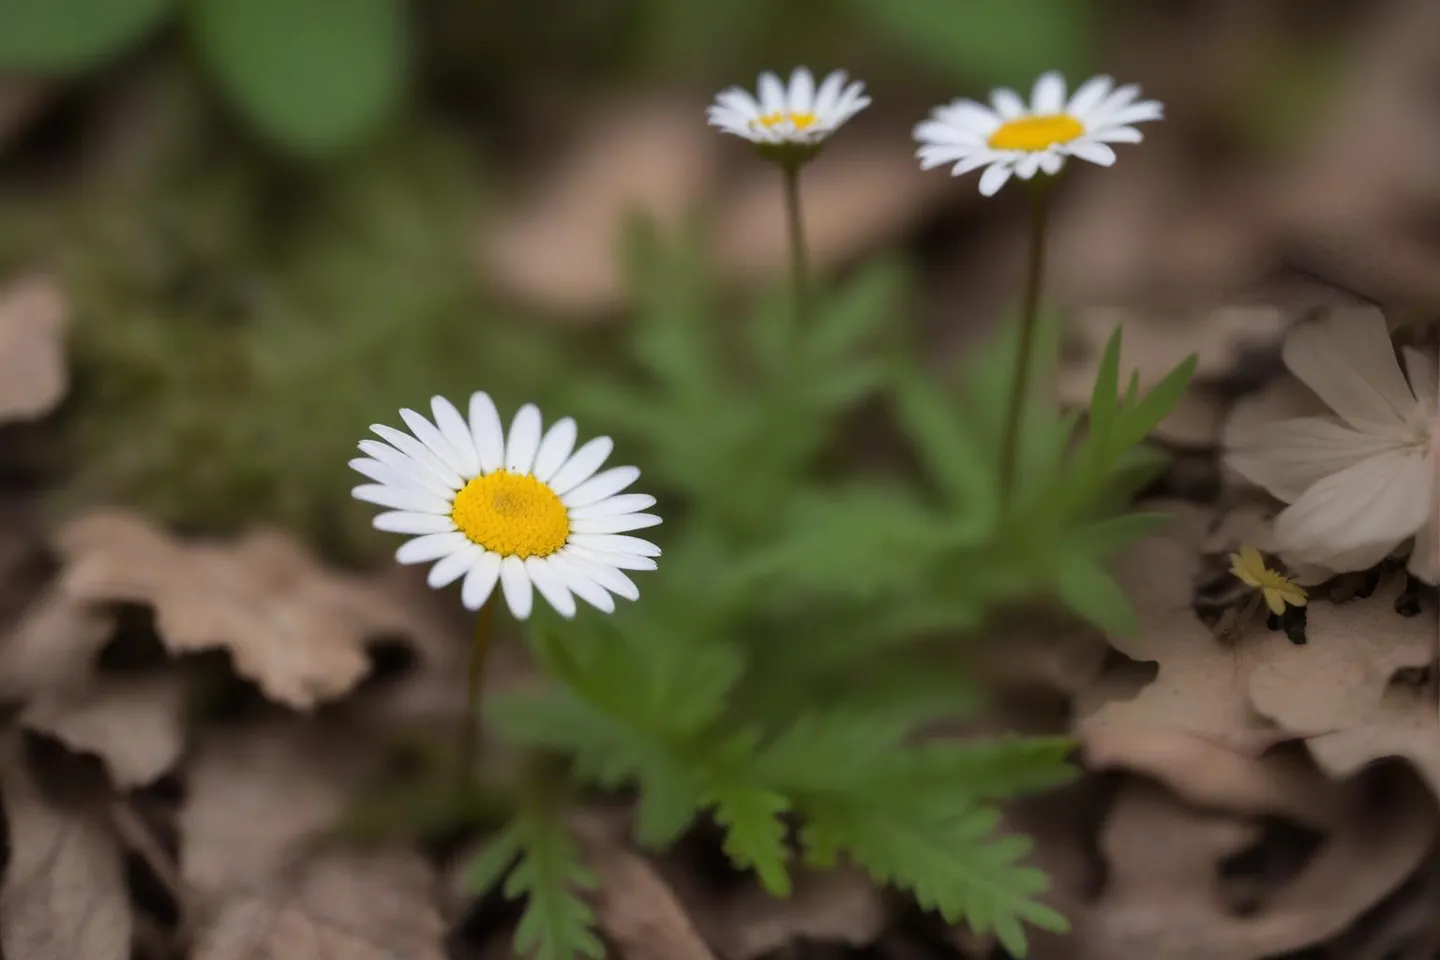 A macro photography shot of a daisy with a yellow center and white petals amidst green foliage and brown background, AI generated using Stable Diffusion.